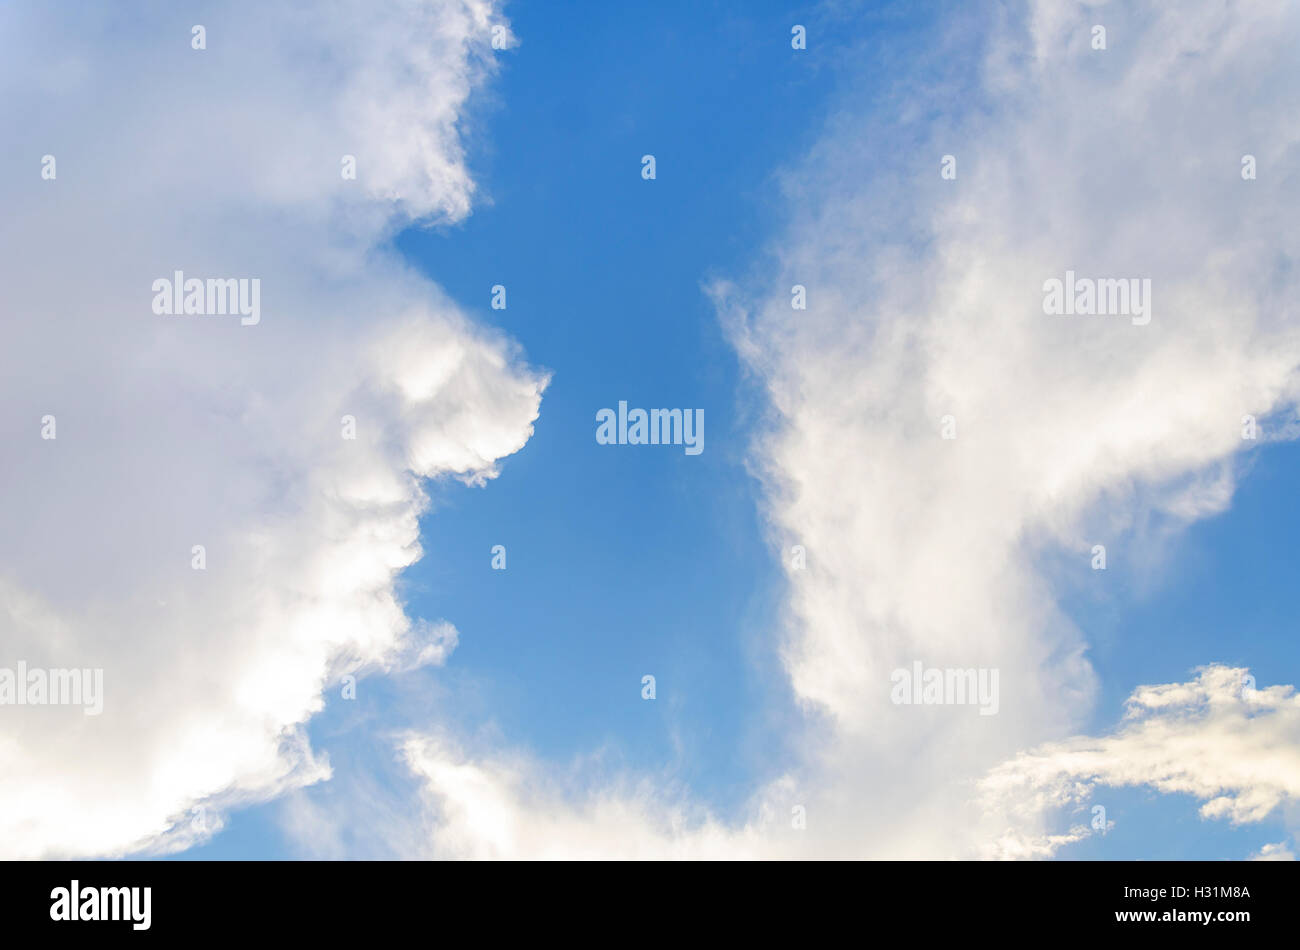 The clouds in the sky on a sunny day. Stock Photo